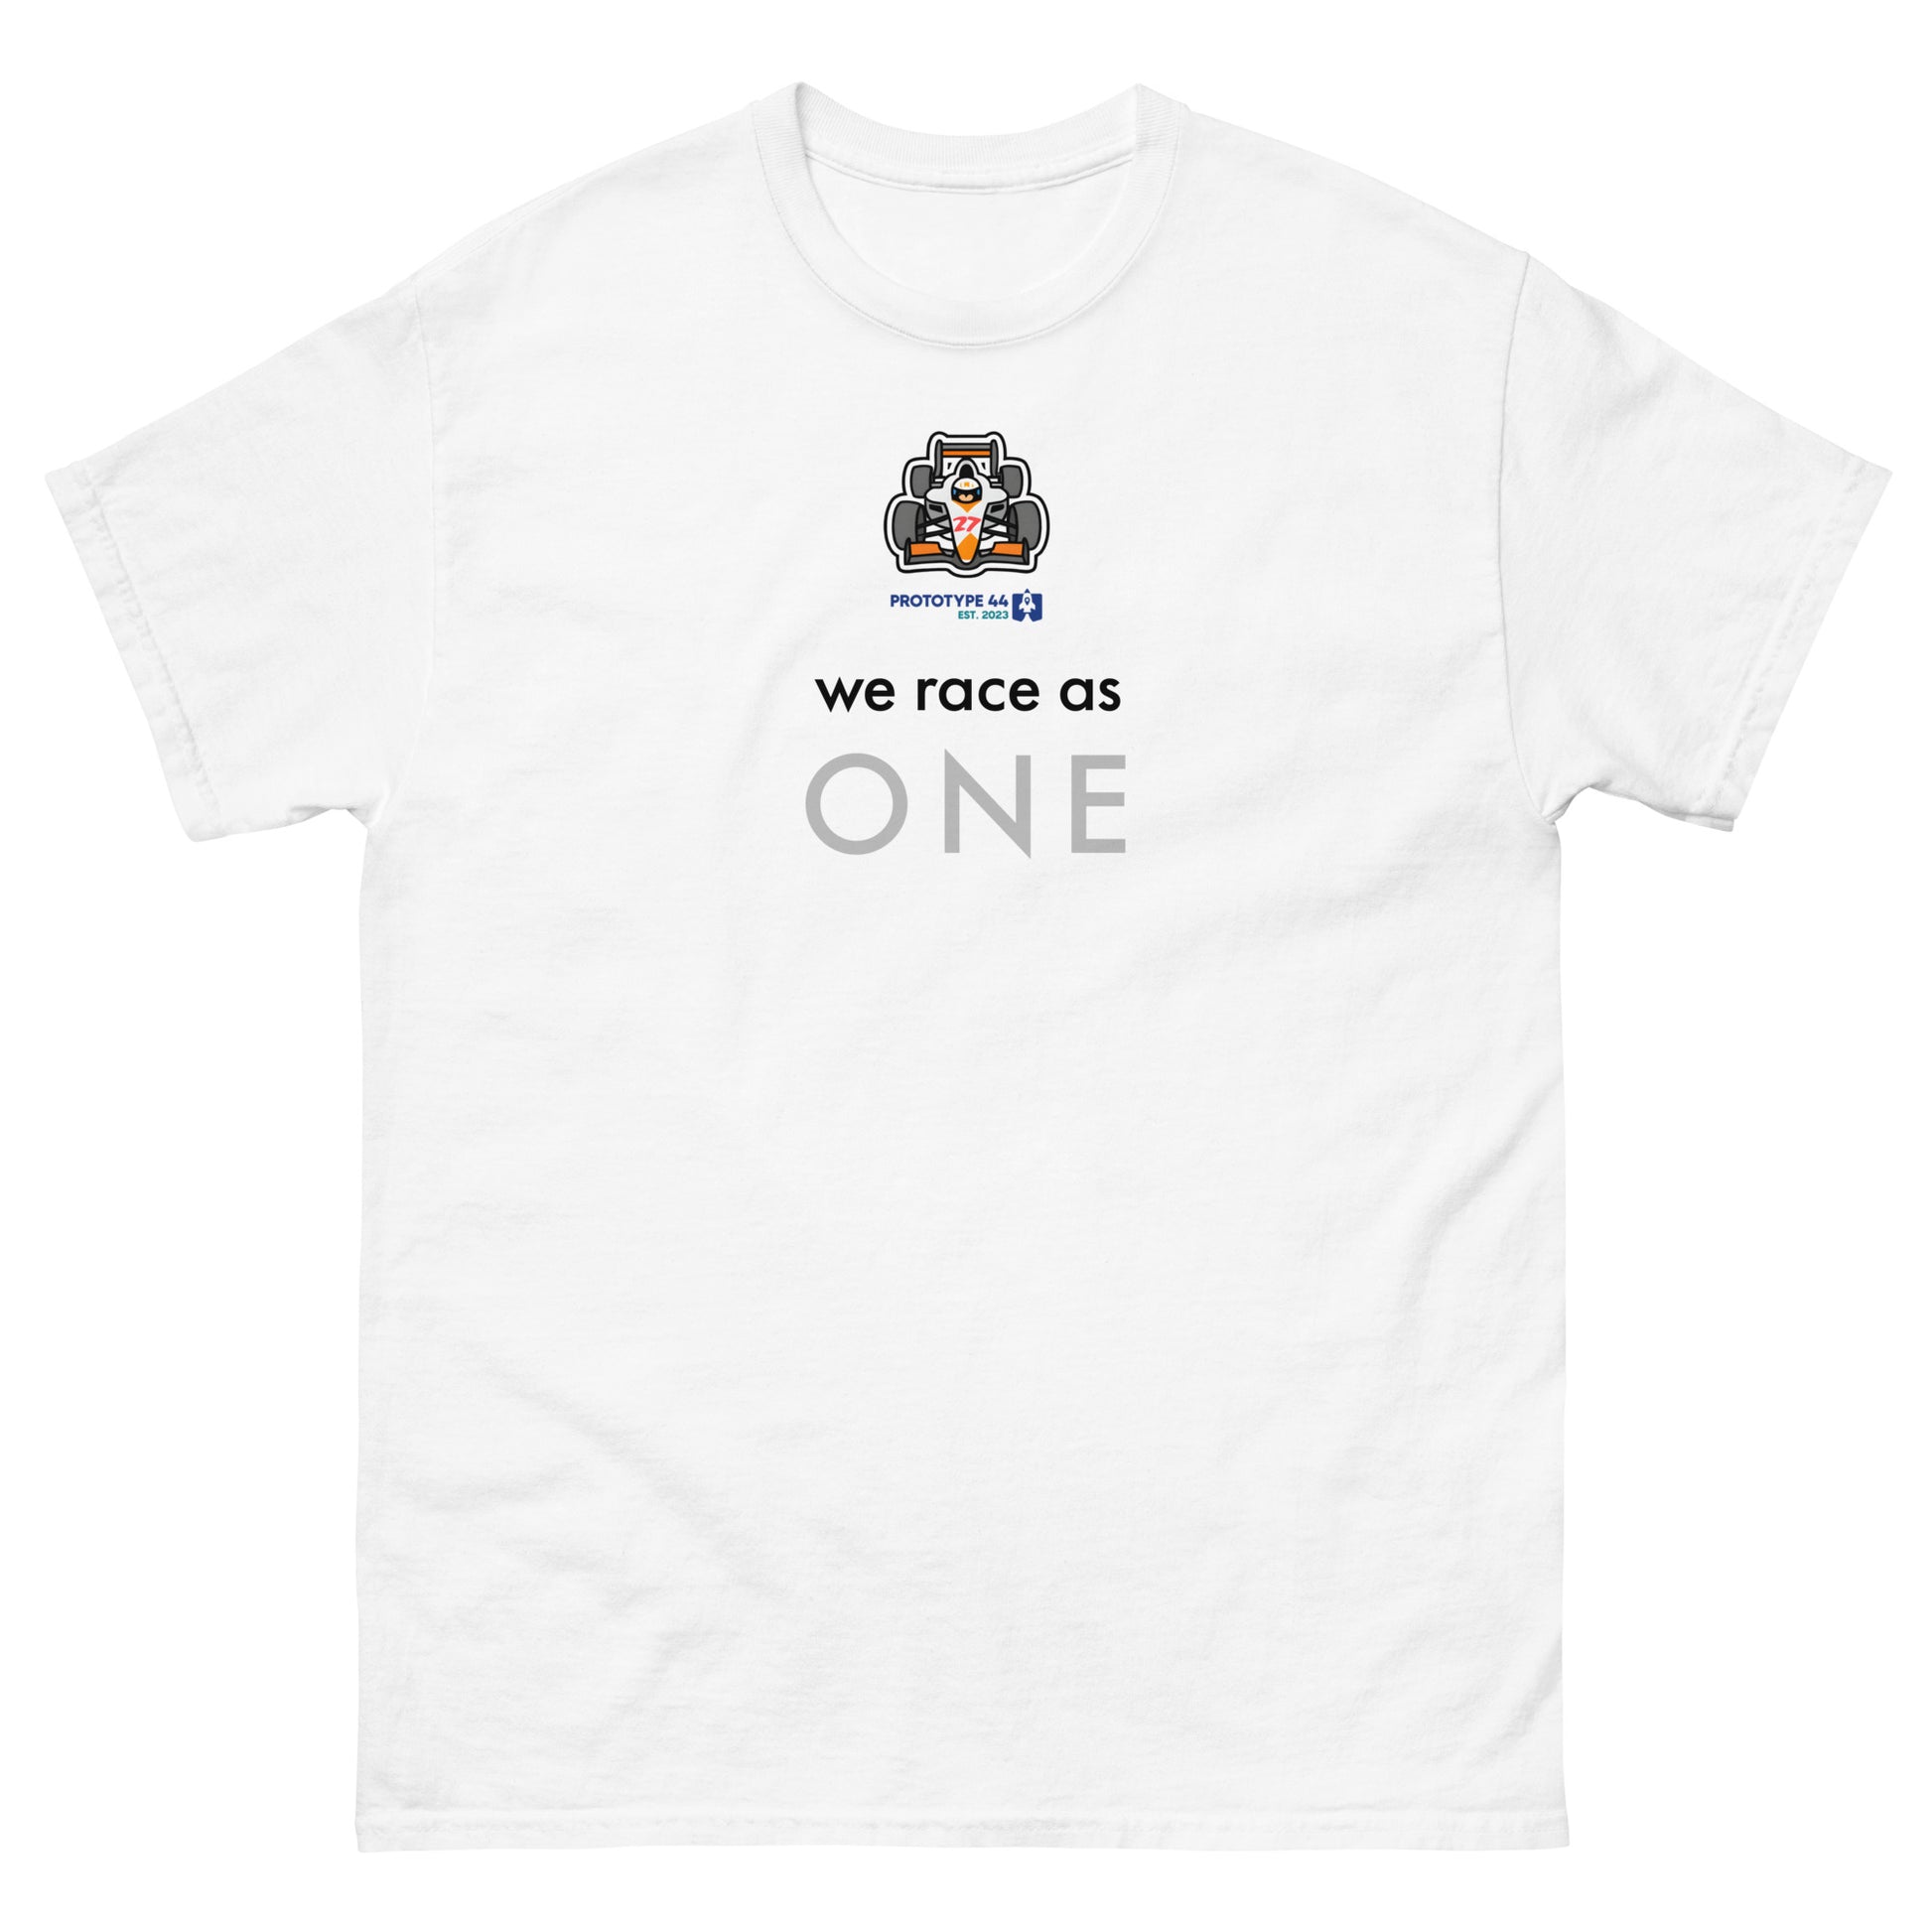 F1 "we race as one" shirt on white surface